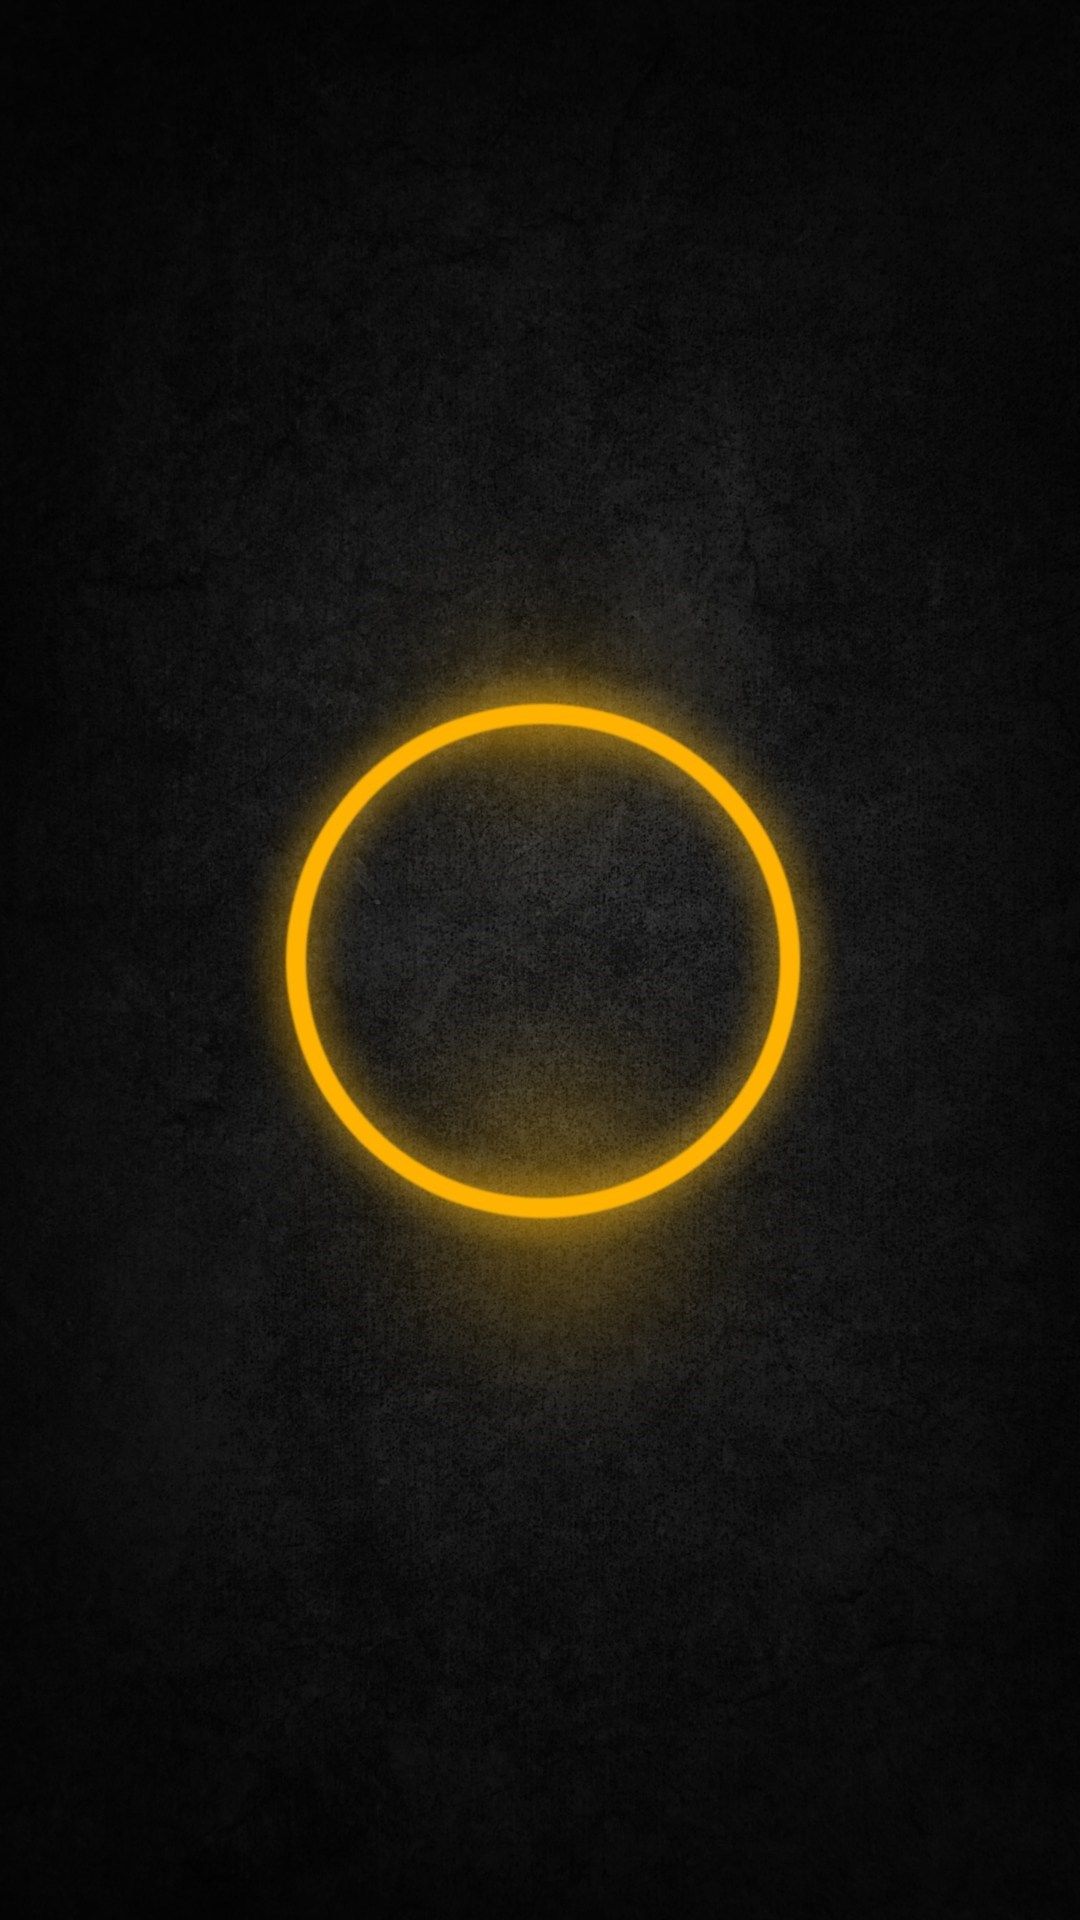 Yellow Halo iPhone 6 / 6 Plus and iPhone 5/4 Wallpapers